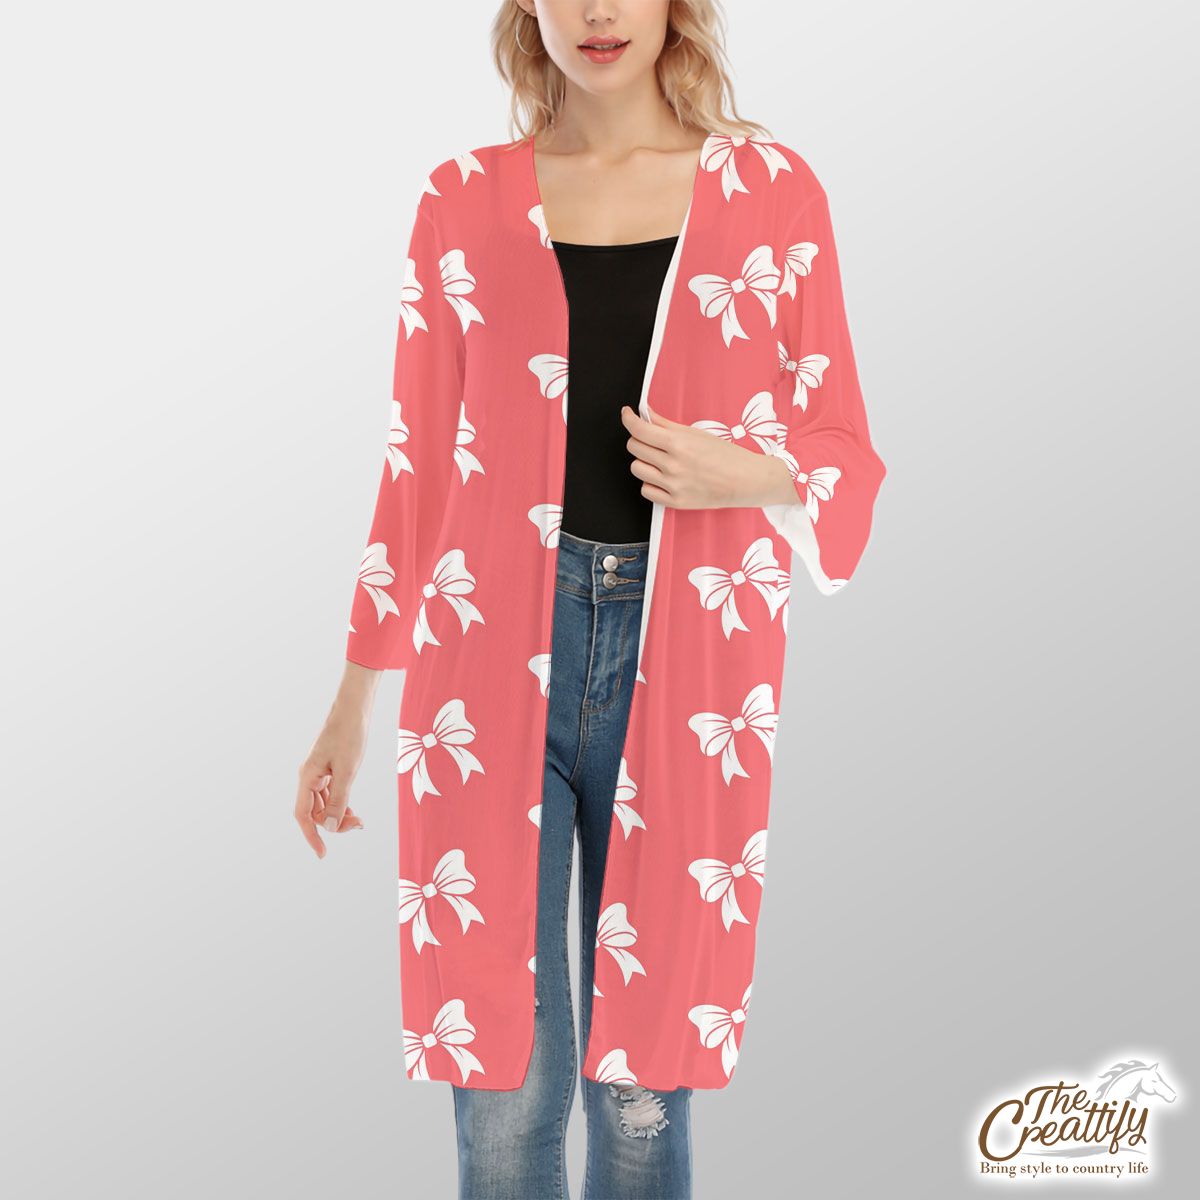 Christmas Bow, Christmas Tree Bows On The Pink Background V-Neck Mesh Cardigan